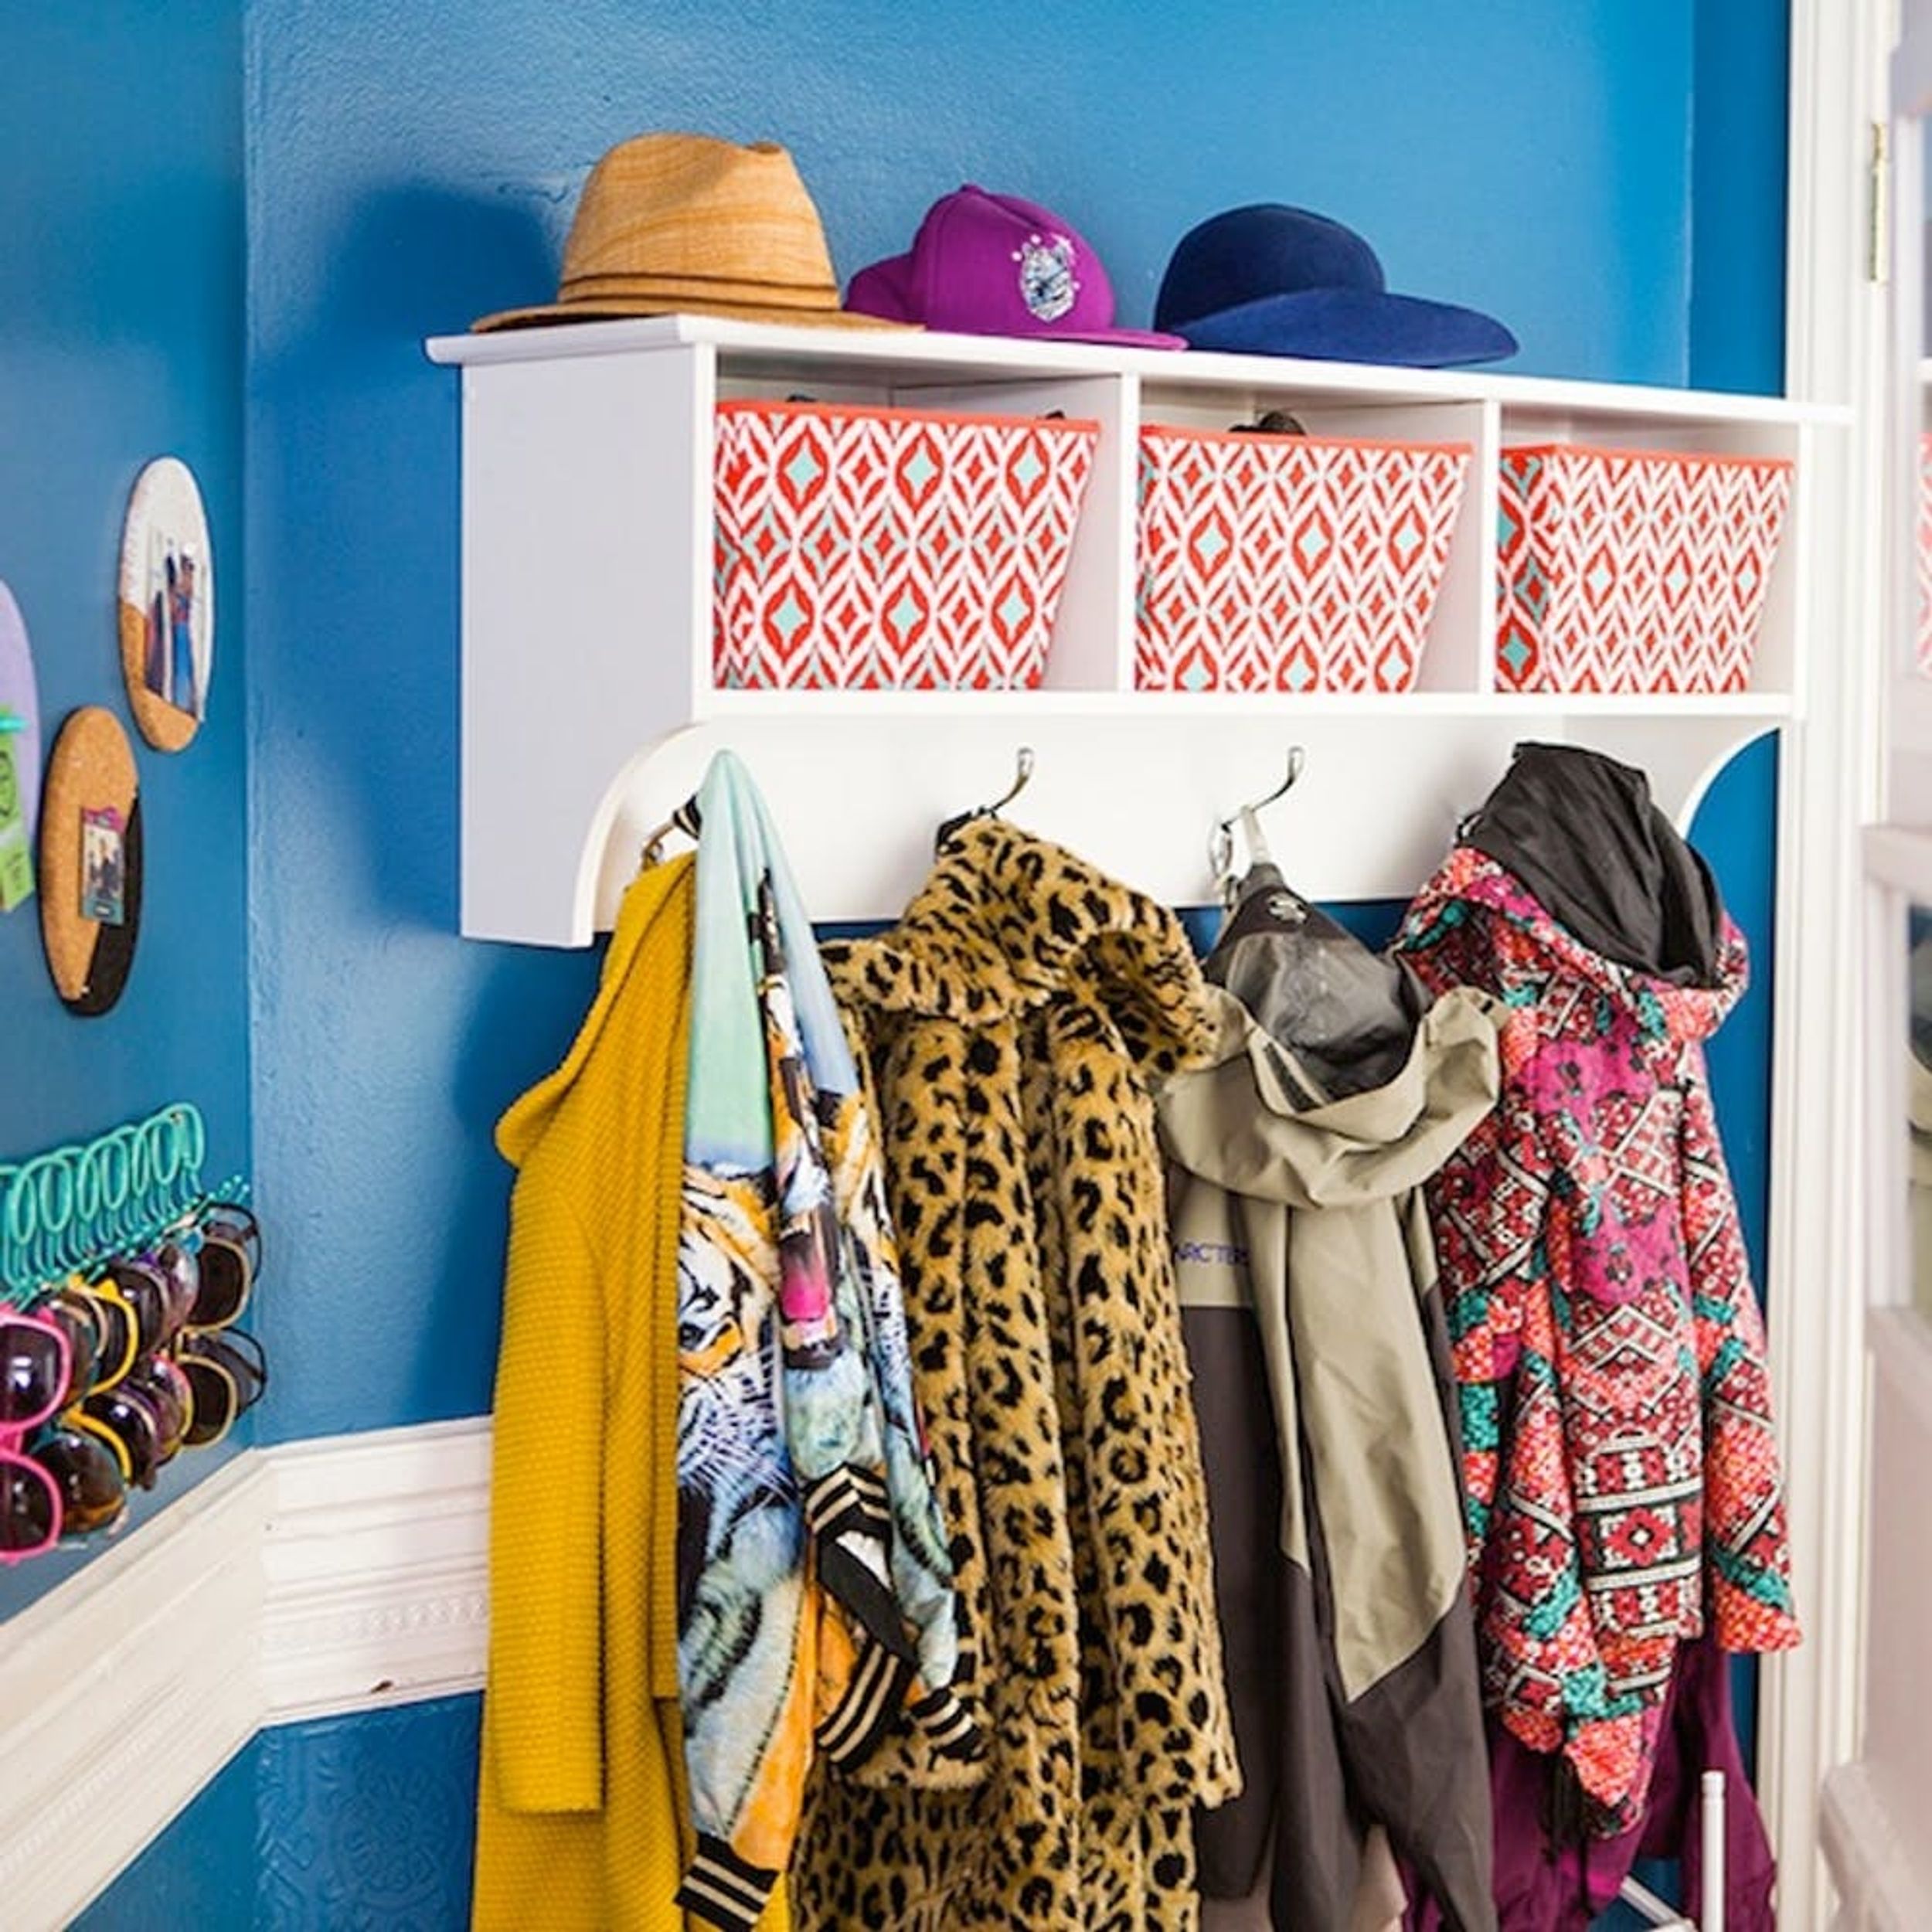 Spring Cleaning 101: 10 Things to Toss from Your Entryway NOW